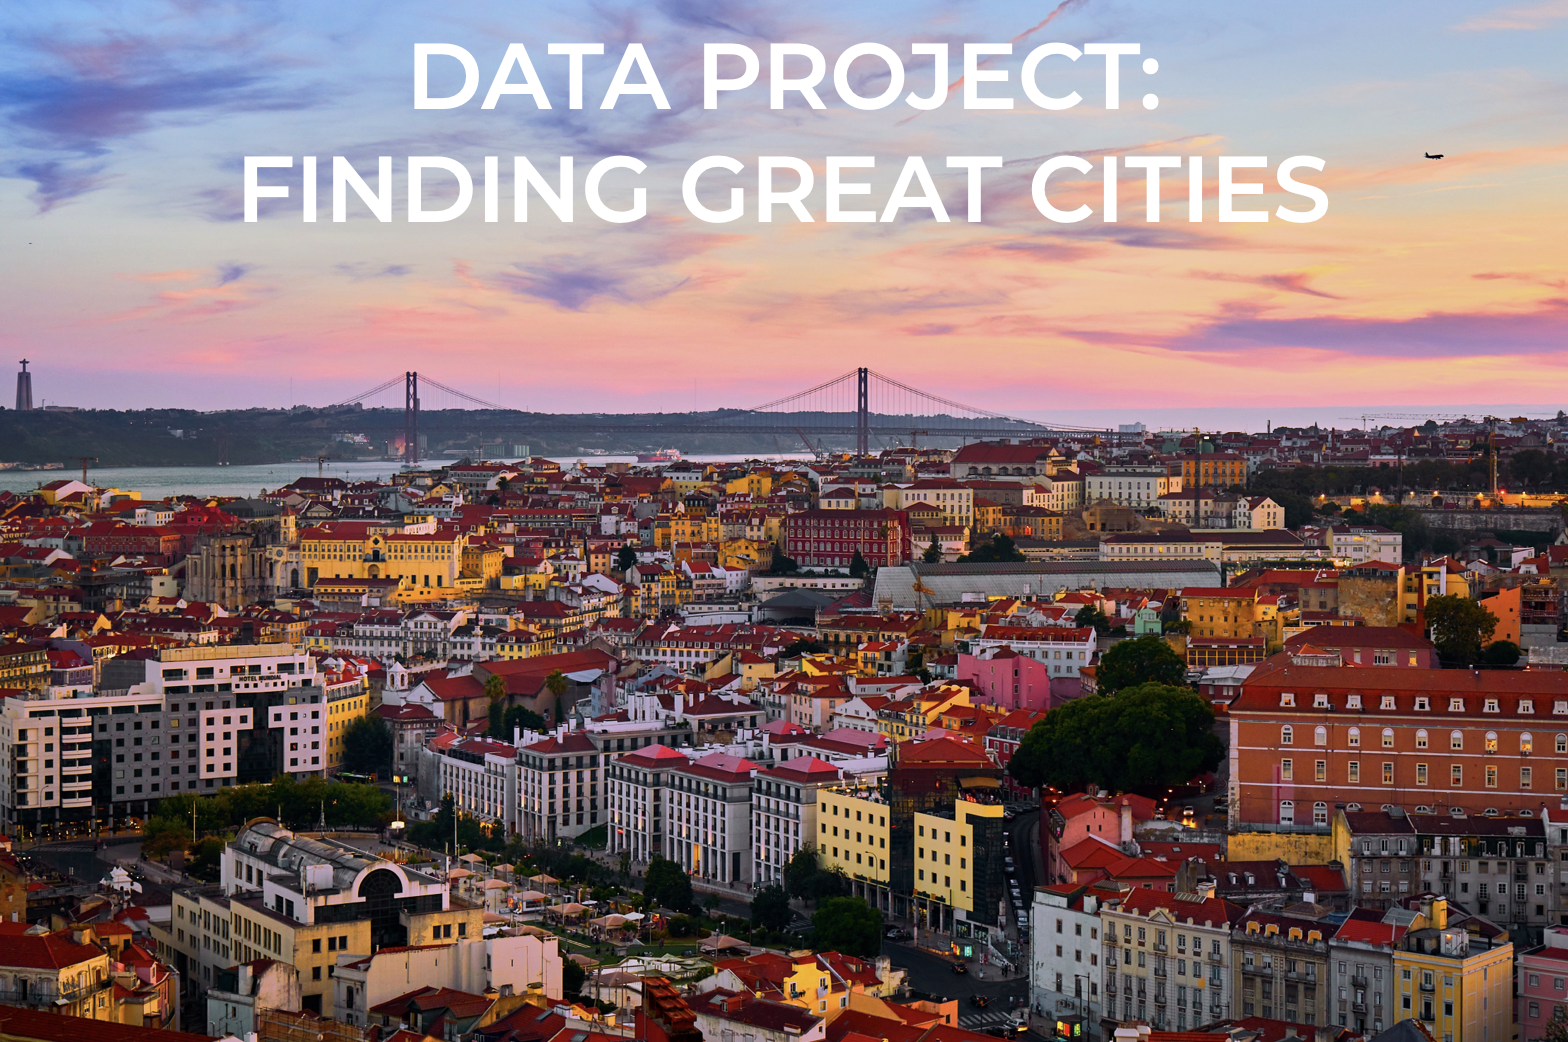 An image of Lisbon, Portugal with the heading "Data Project: Finding Great Cities"